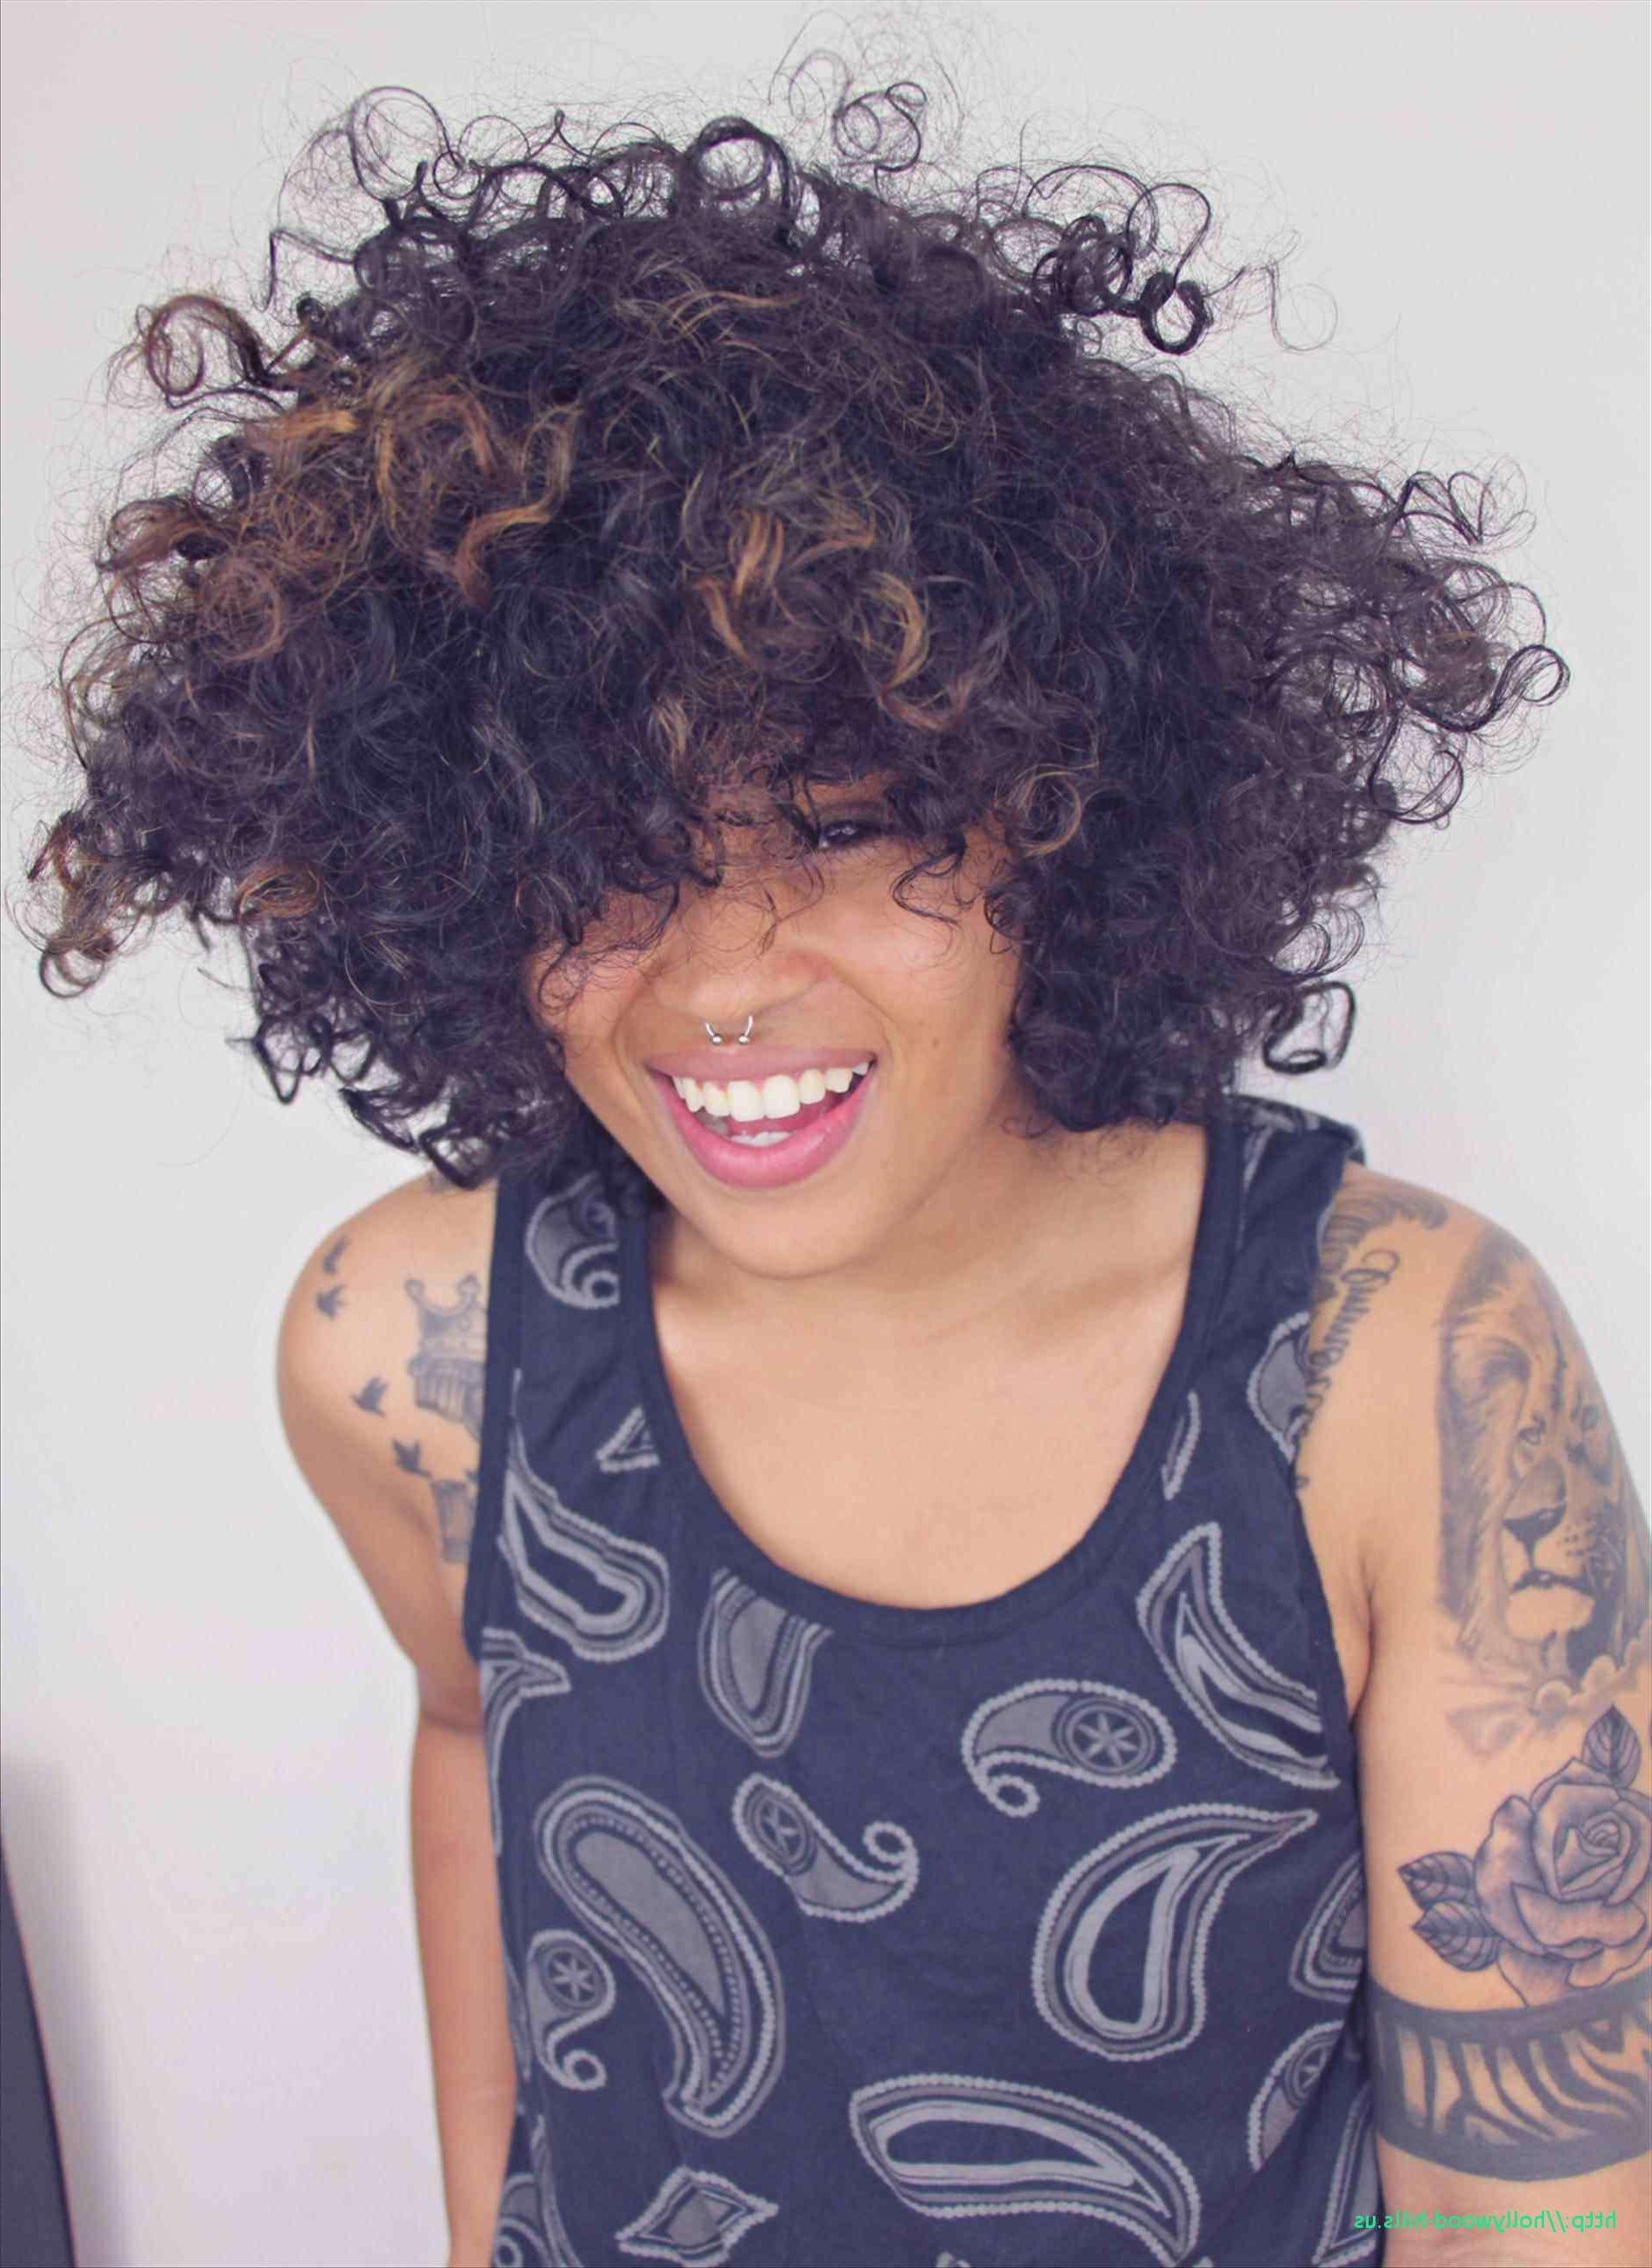 Curly Hairstyles Tumblr Inspiration Of Short Natural Curly Hair Tumblr Inside Short Curly Hairstyles Tumblr (View 4 of 25)